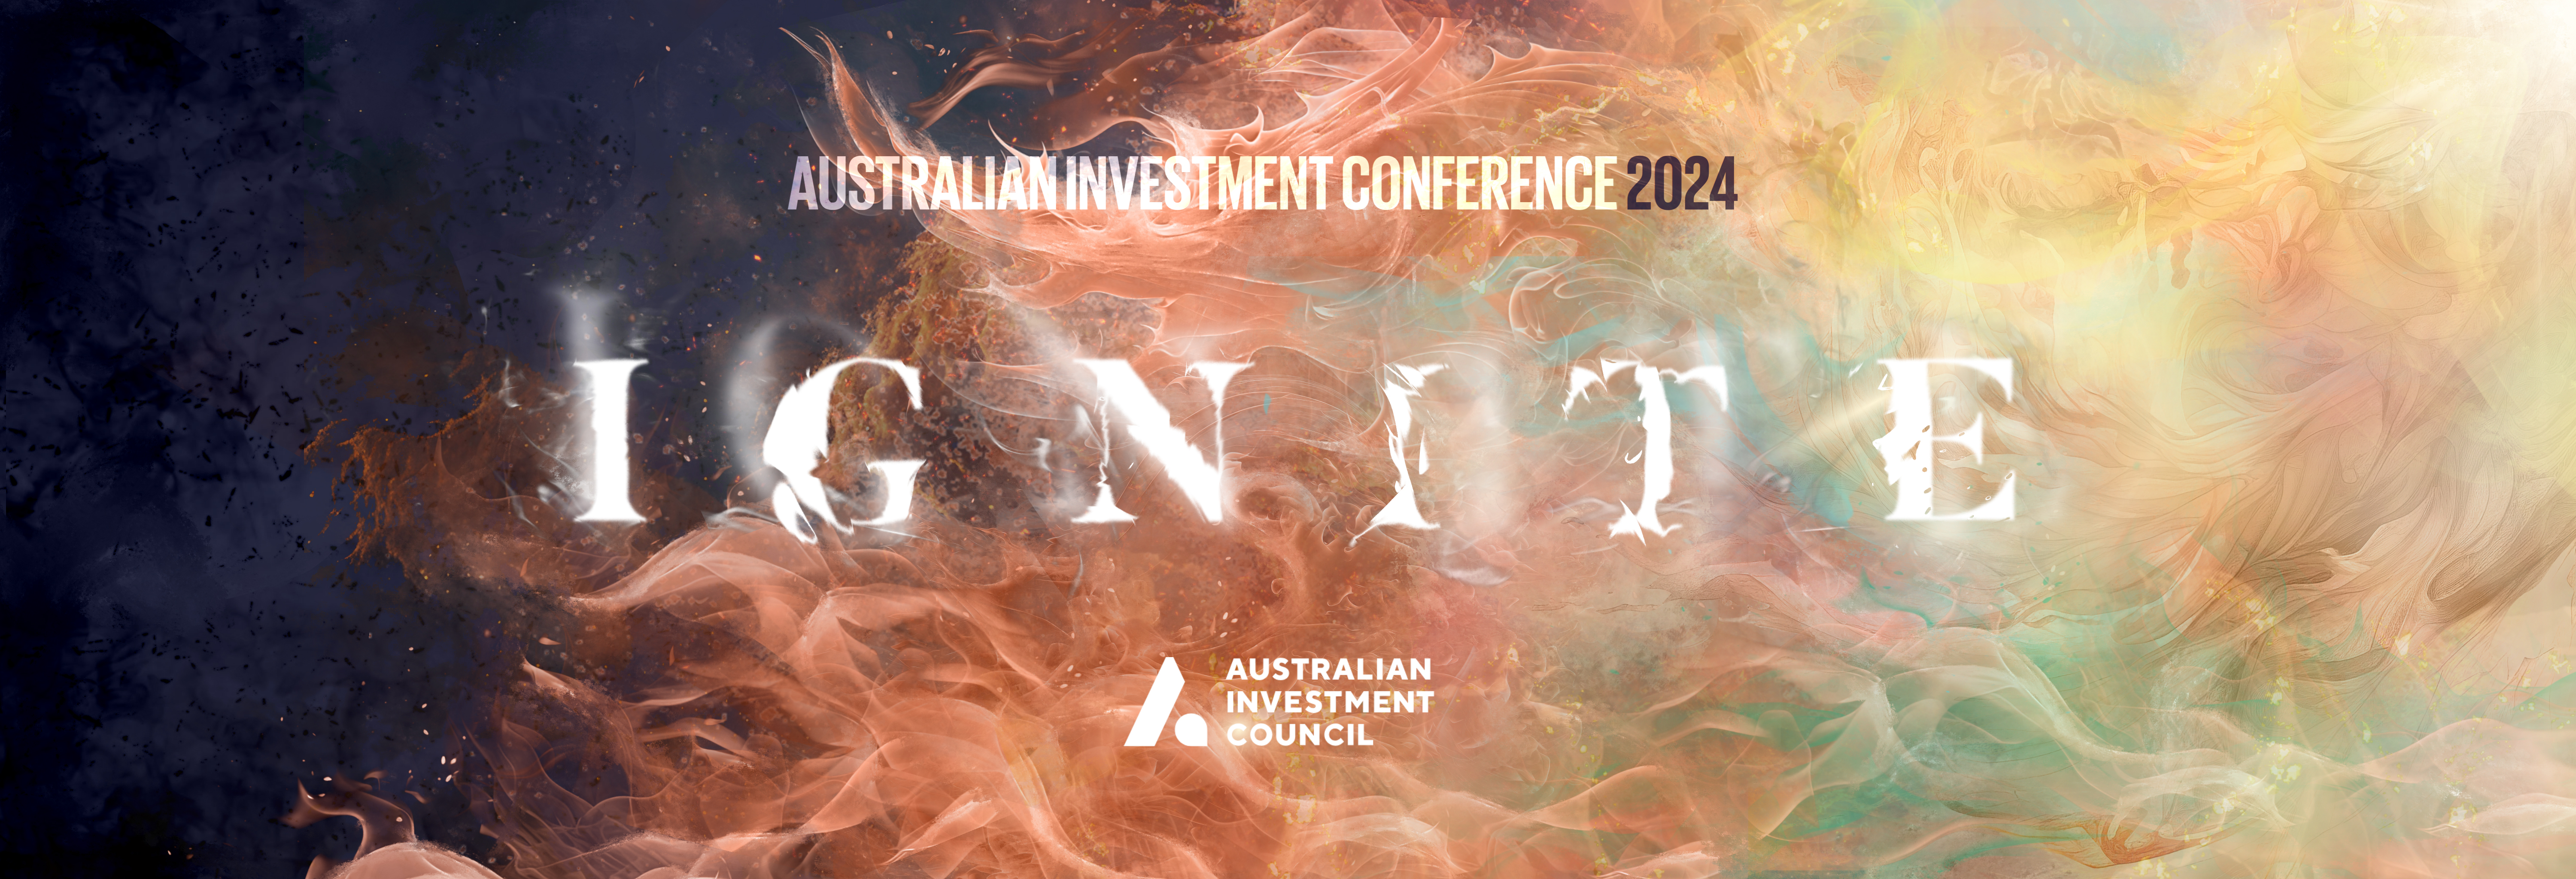 Australian Investment Conference 2024